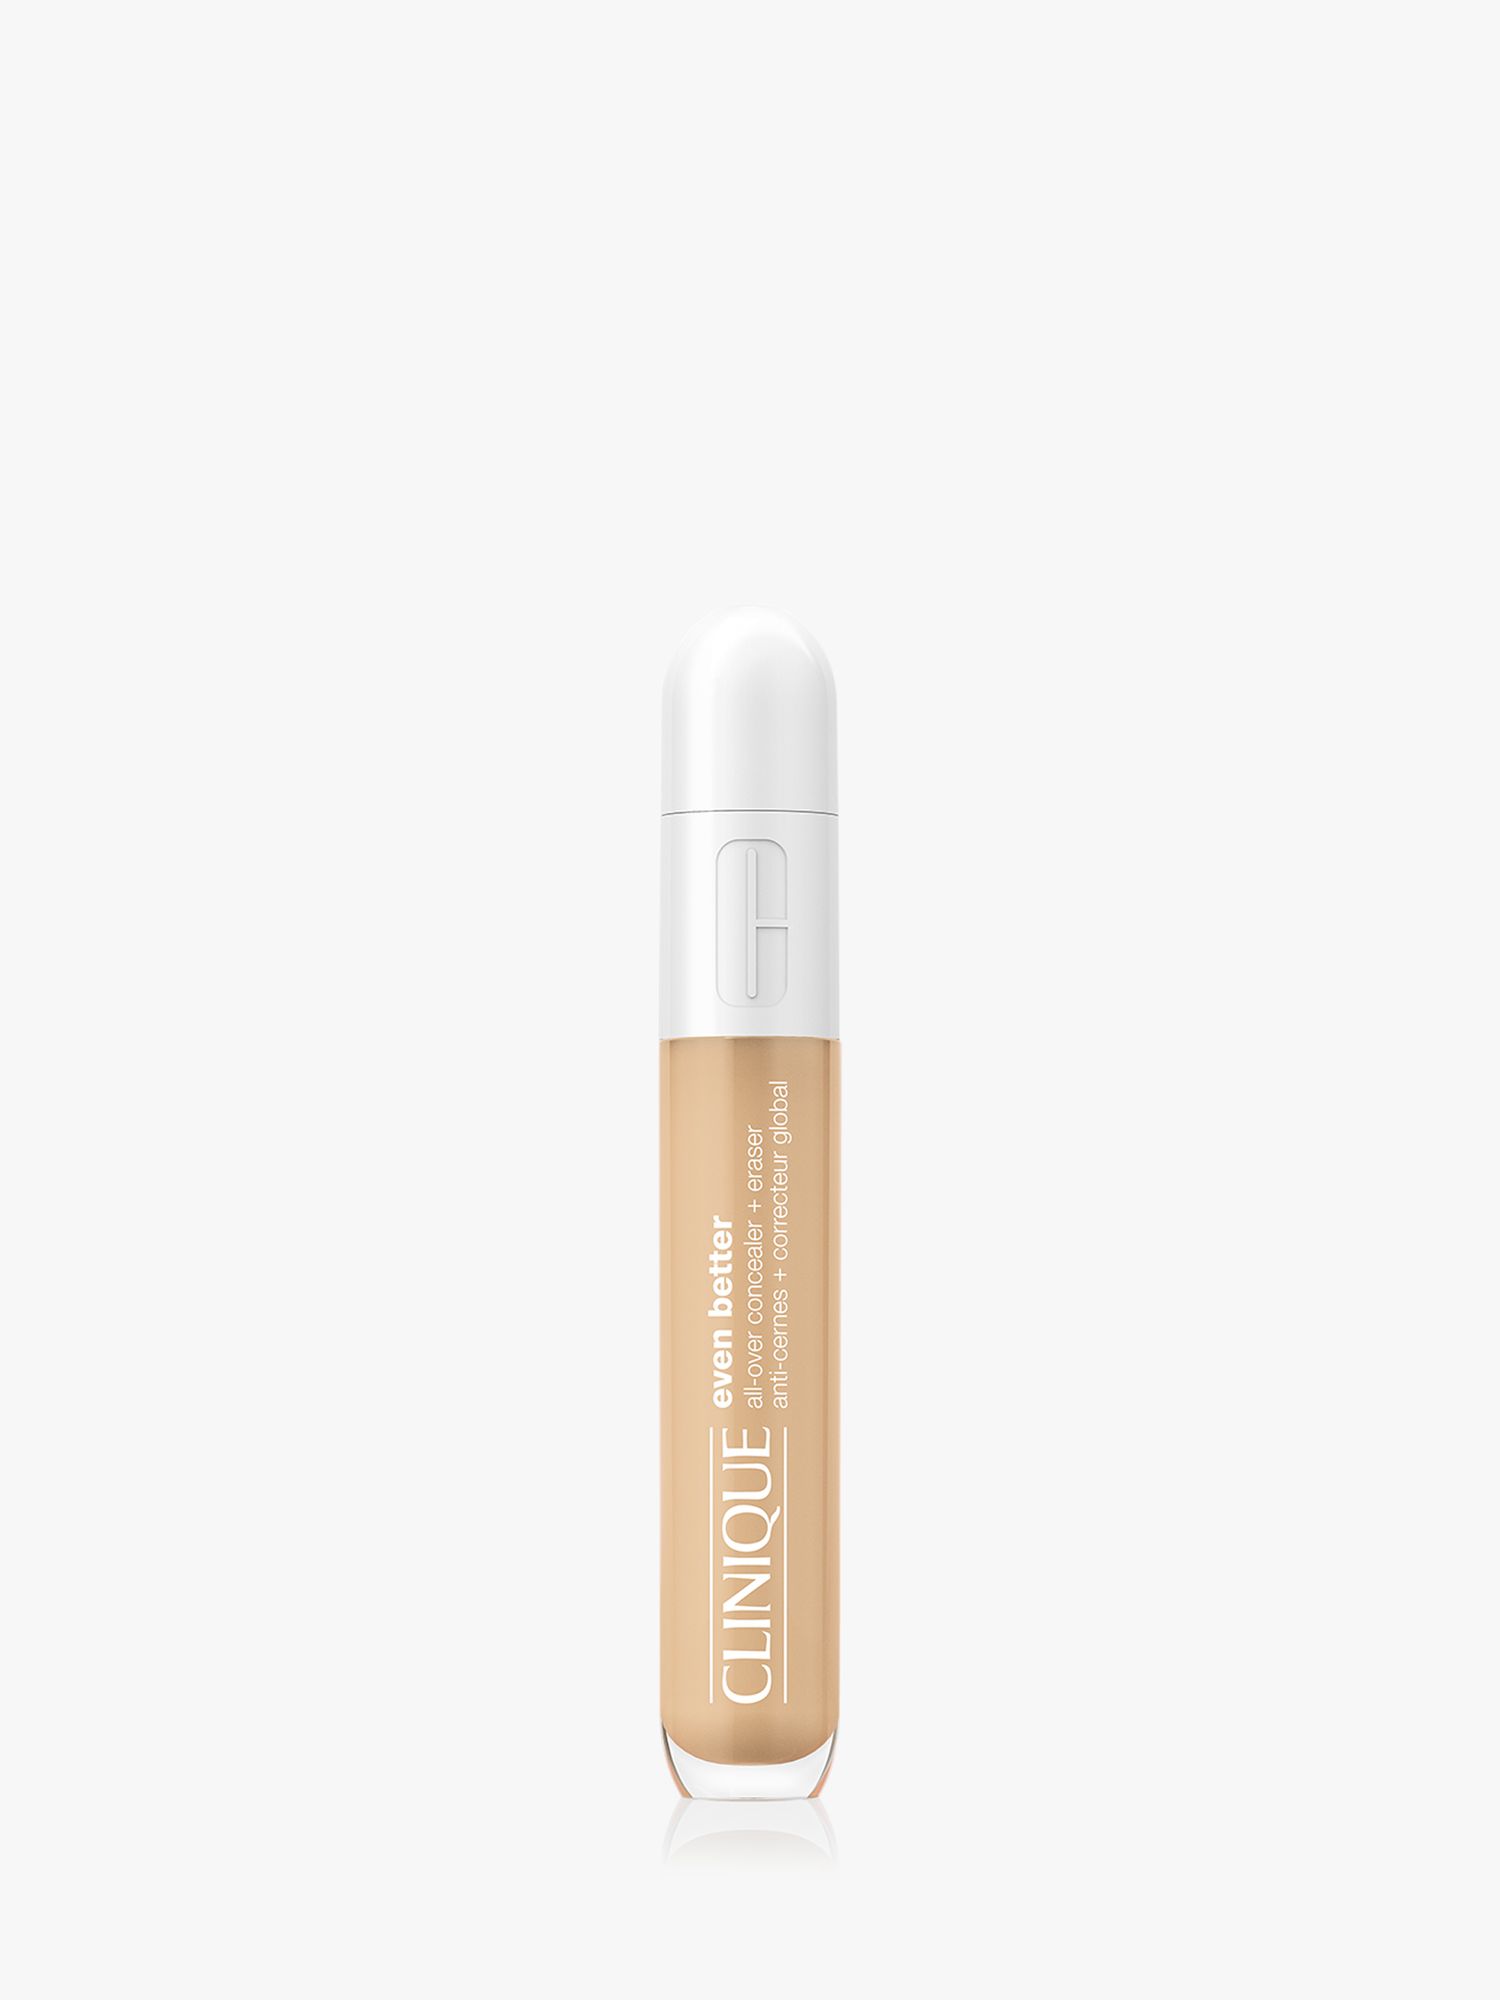 Clinique Even Better All-Over Concealer + Eraser, WN38 Stone 1